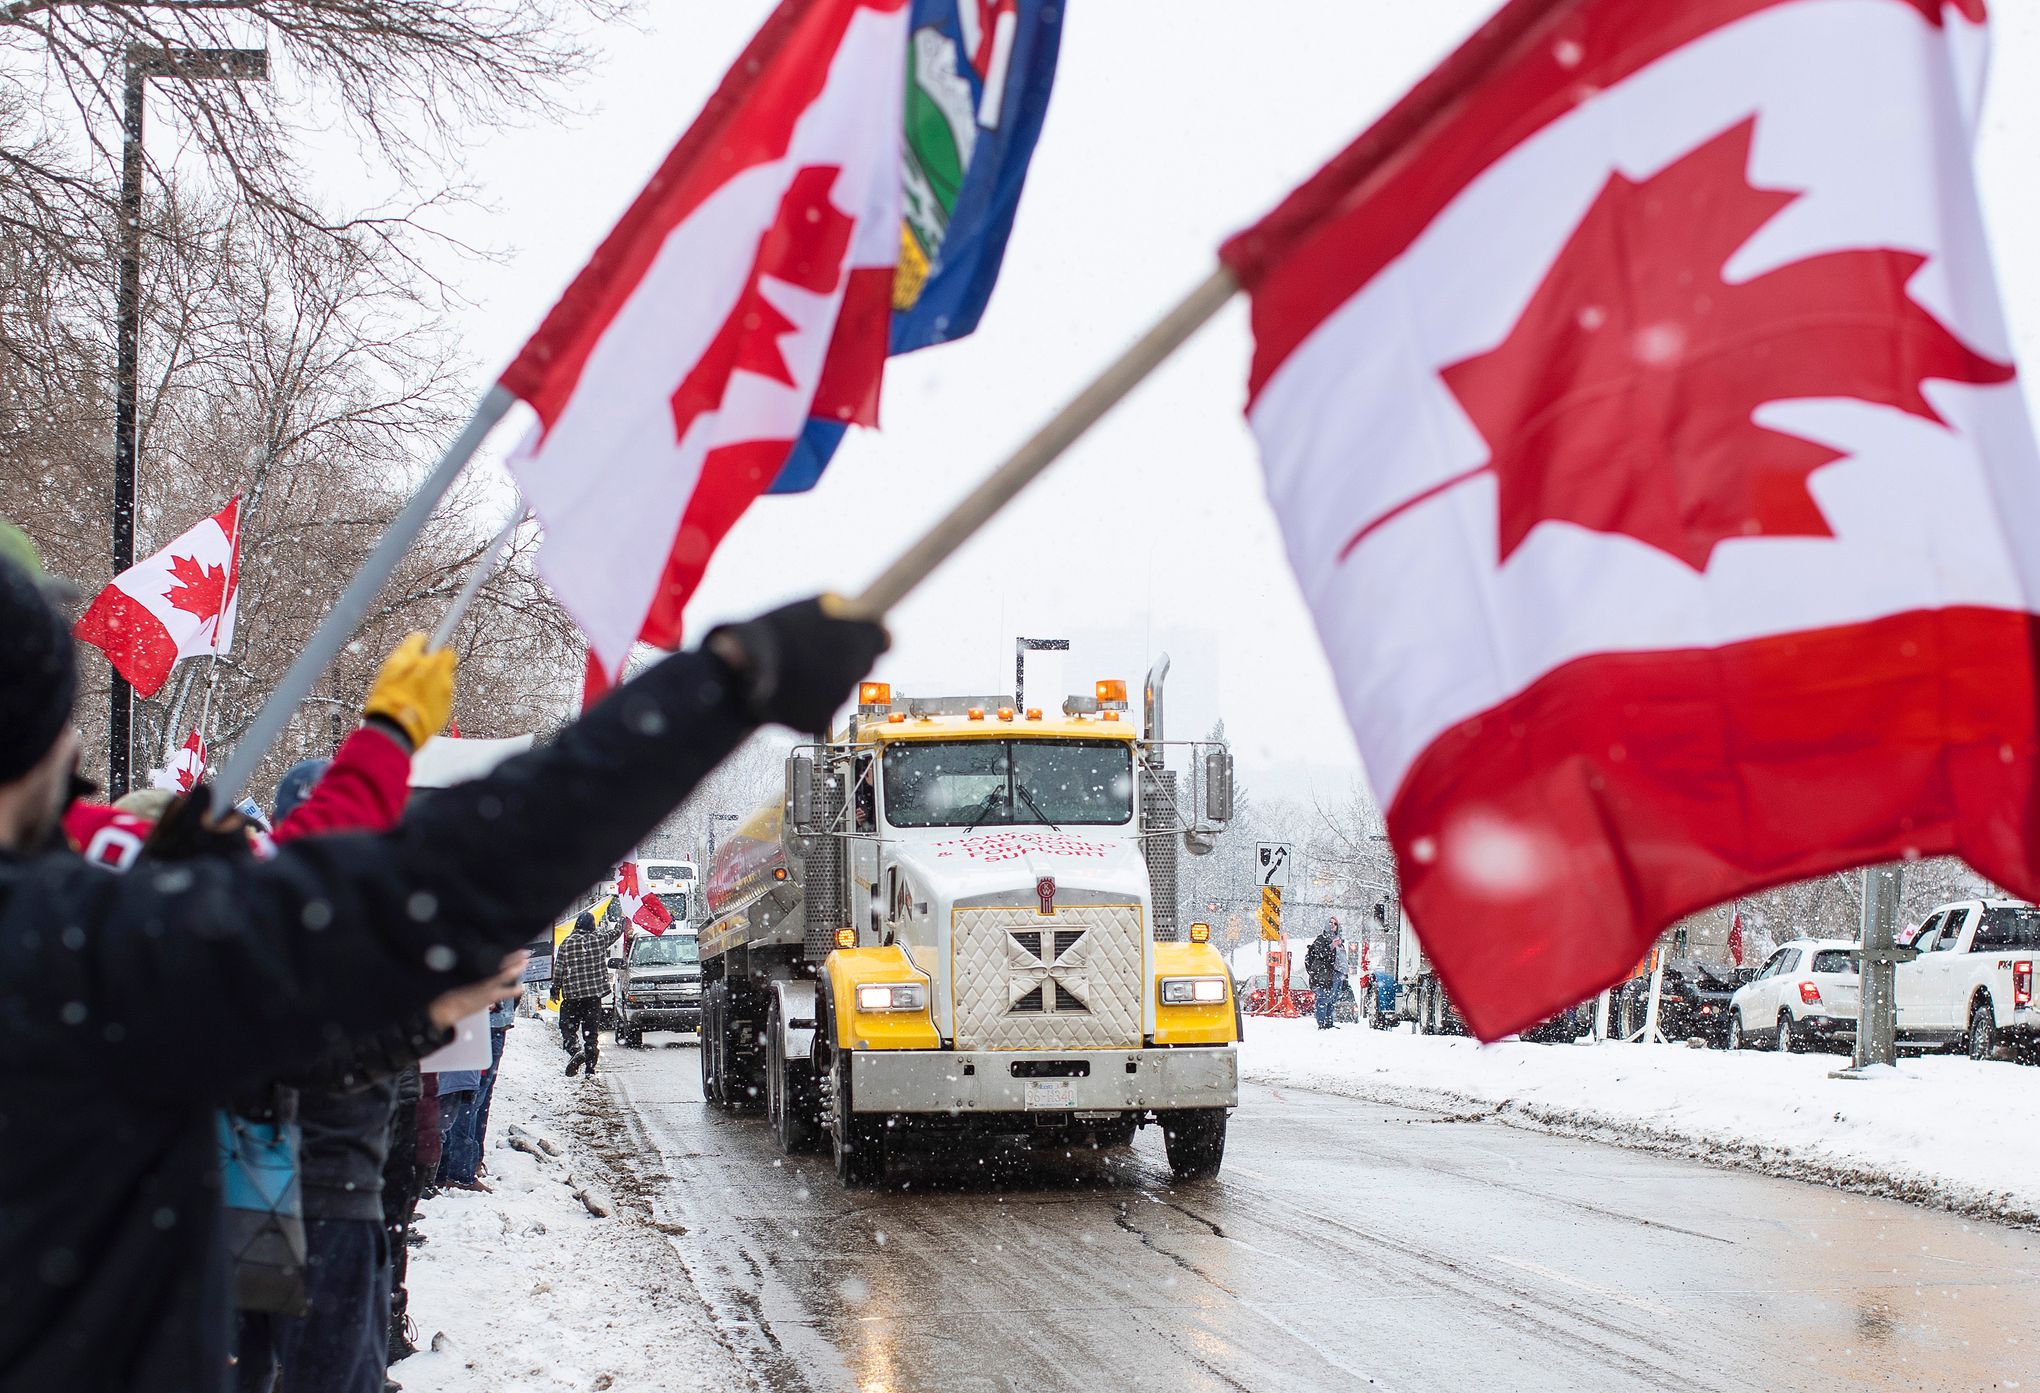 Ottawa declares state of emergency over COVID-19 protests